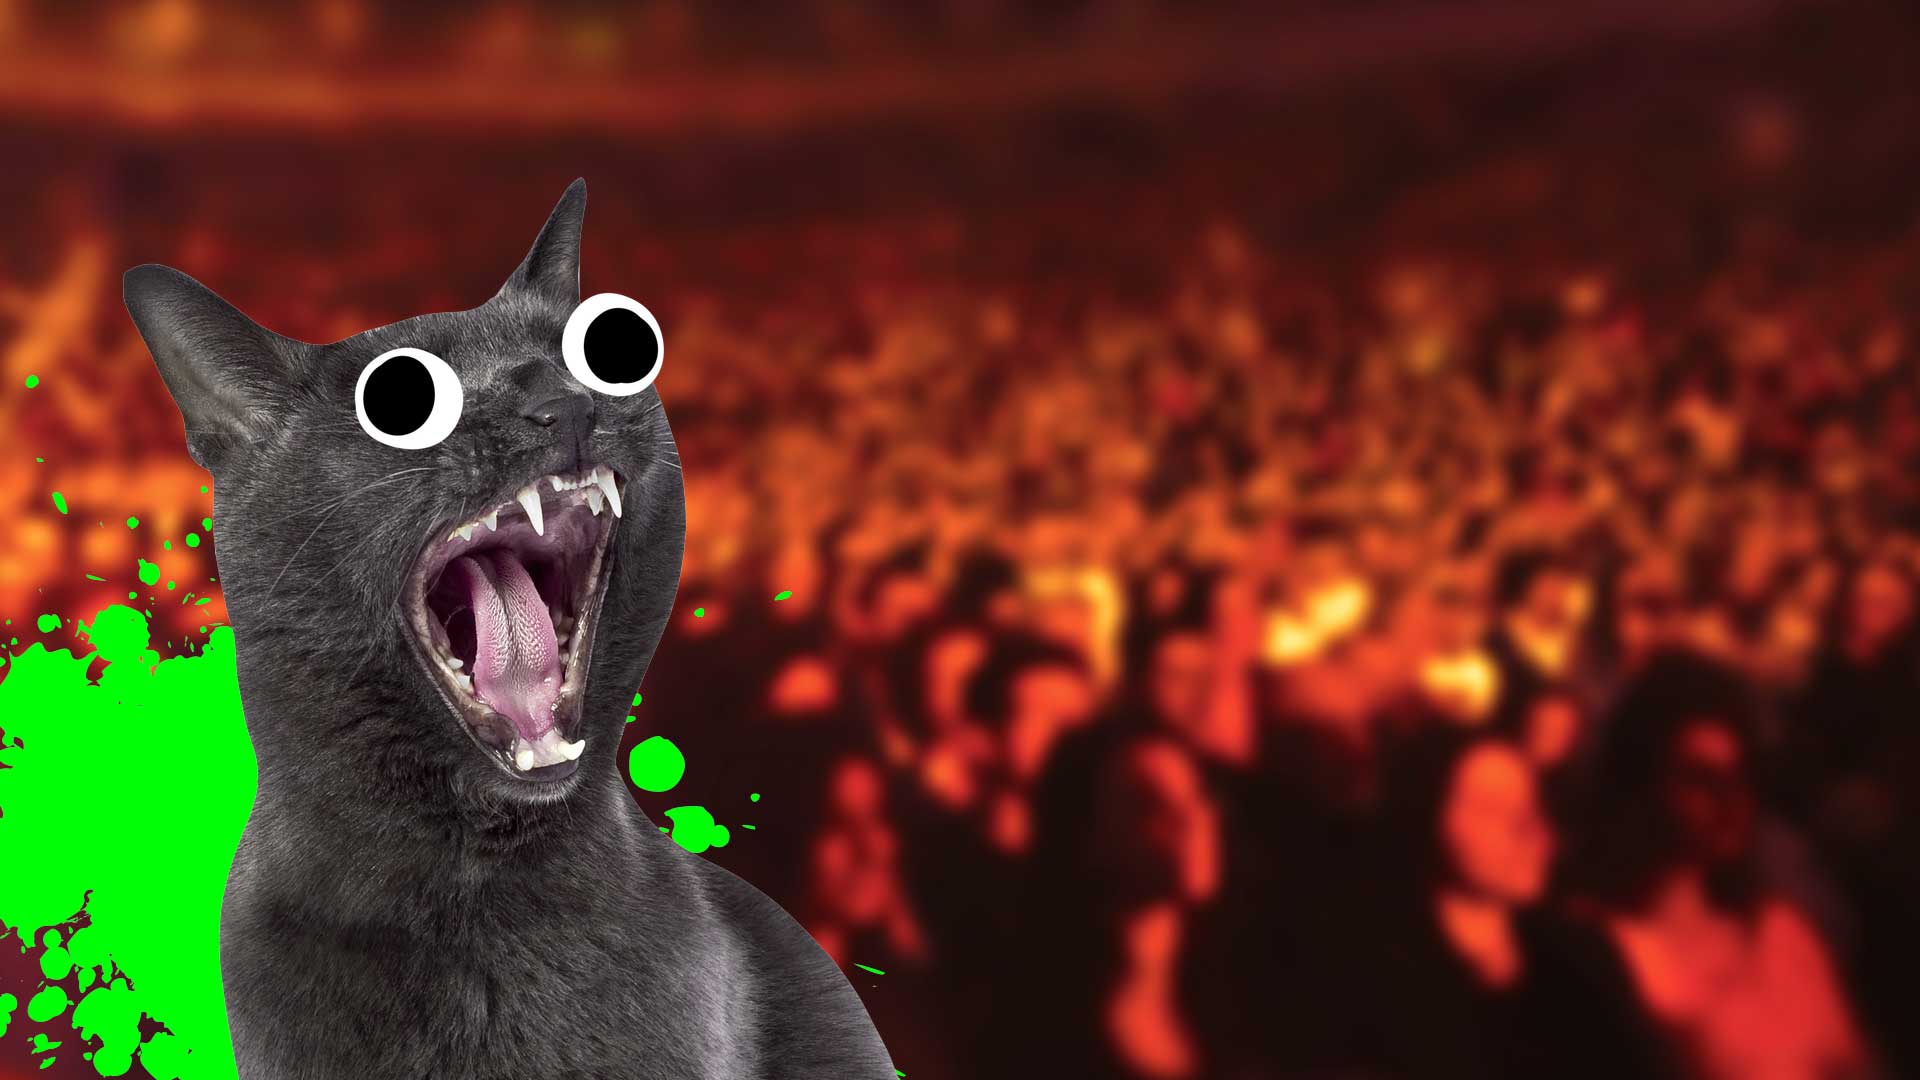 A shouting cat and a blurred theatre audience 